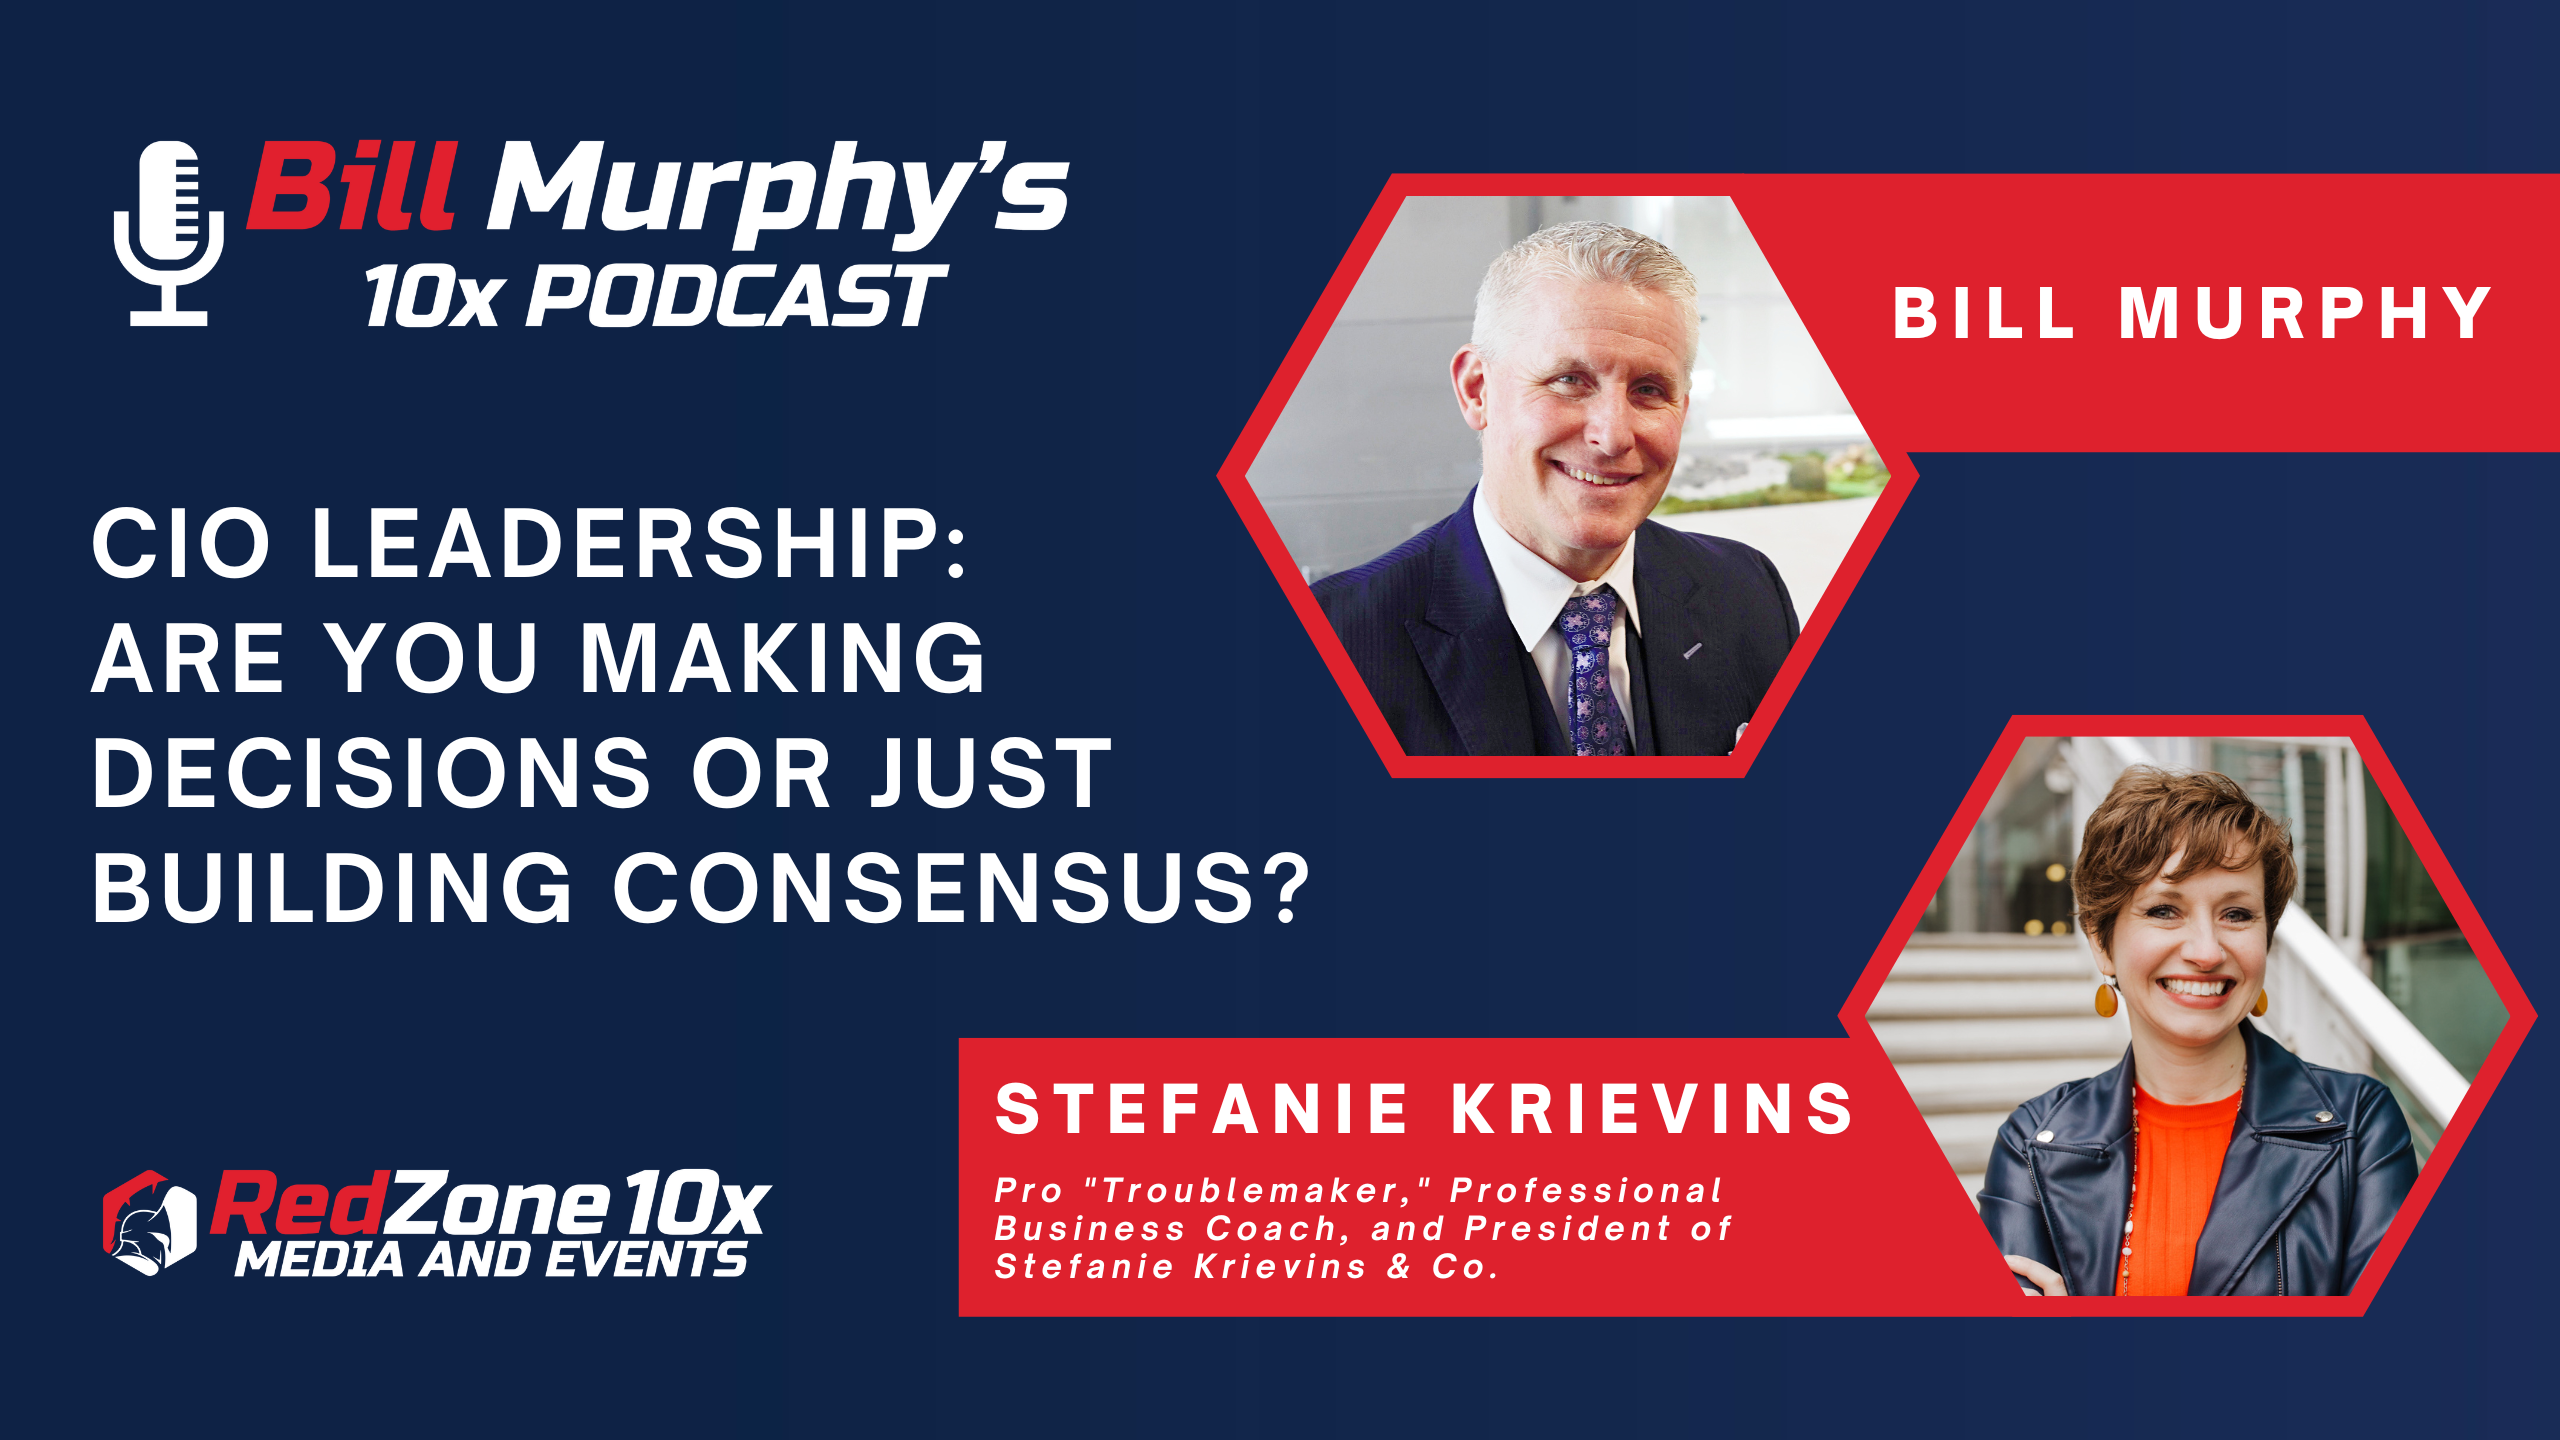 CIO Leadership: Are You Making Decisions or Just Building Consensus? - with Stefanie Krievins, Pro "Troublemaker", Professional Business Coach, and President of Stefanie Krievins & Co.